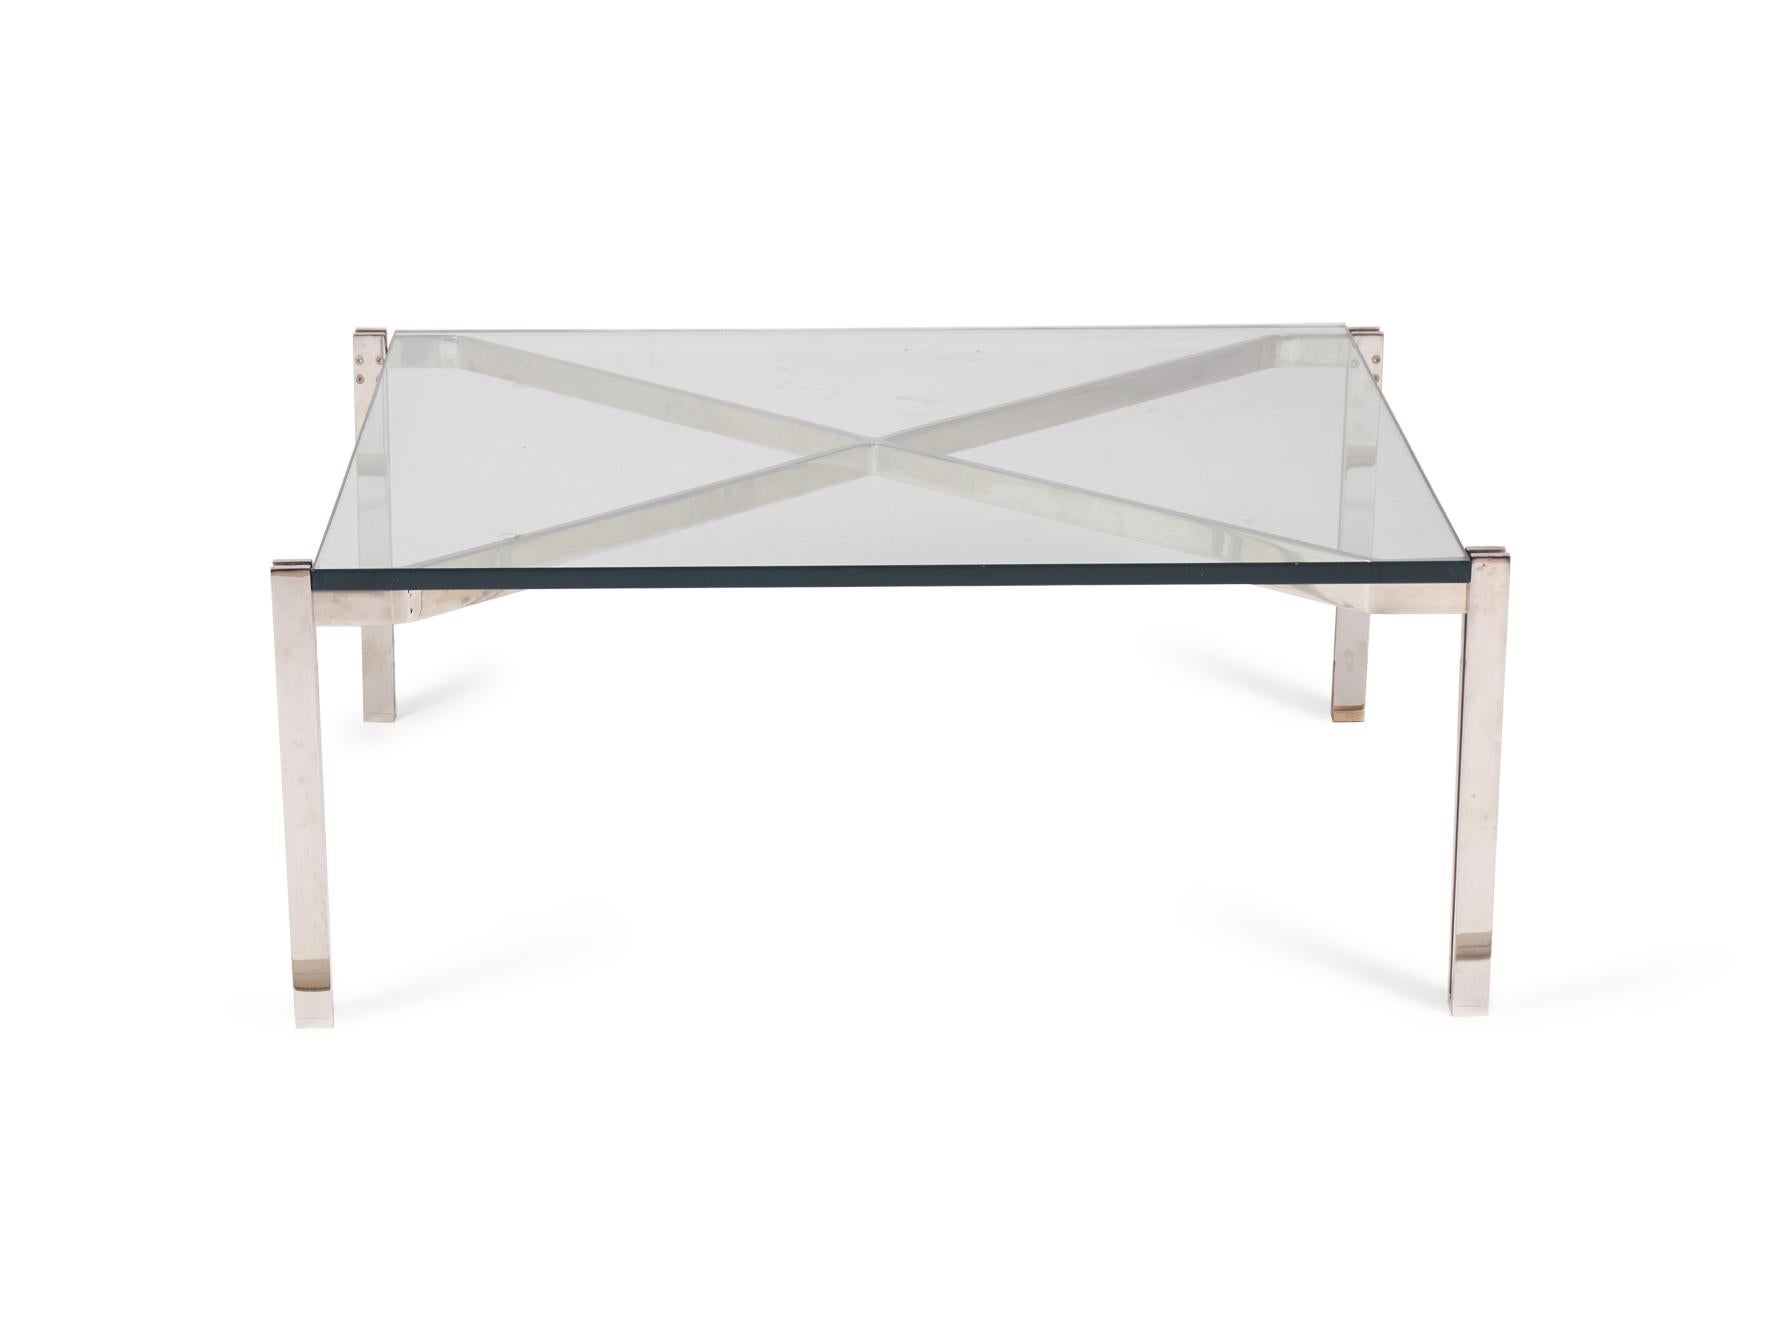 20th Century Italian Modernist 'X' Frame Steel and Glass Coffee Table 'Manner of B&B Italia' For Sale